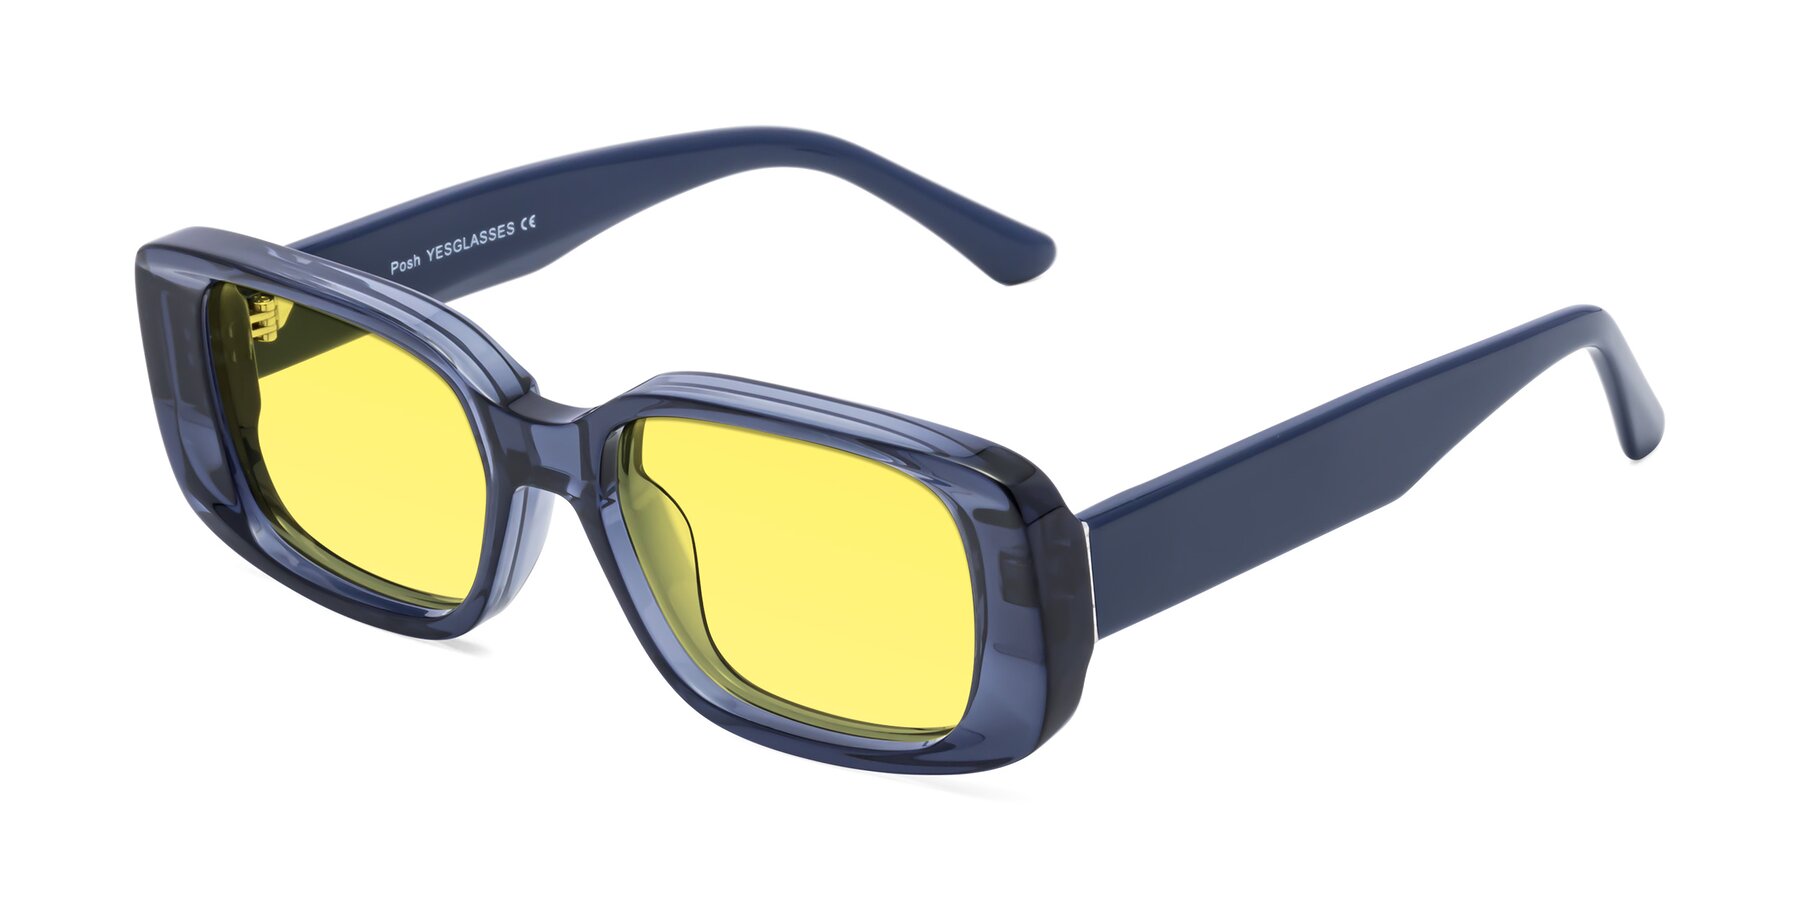 Angle of Posh in Translucent Blue with Medium Yellow Tinted Lenses